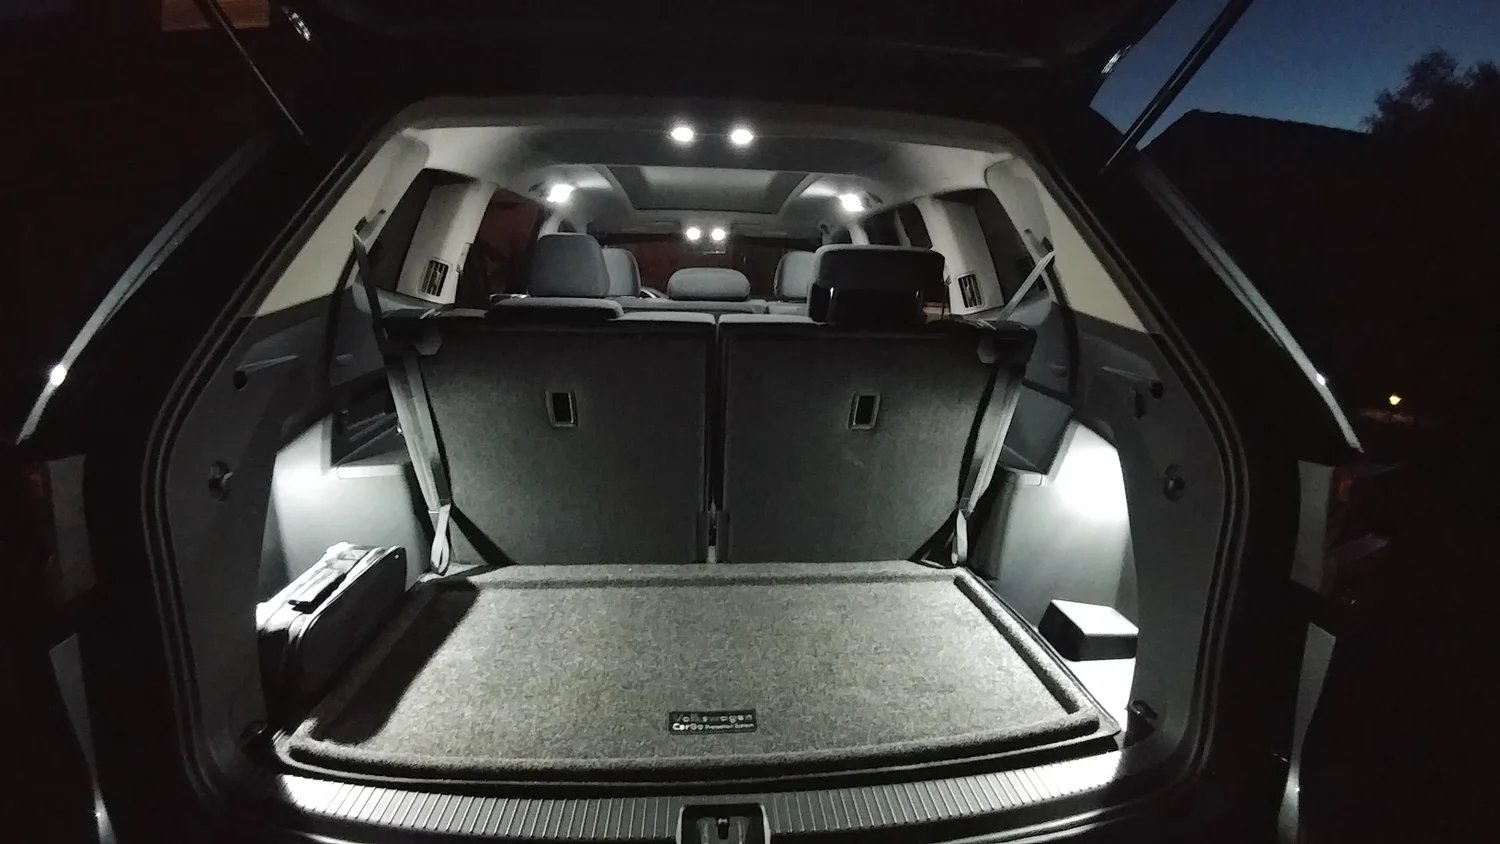 Image of 2pc Trunk LEDs with optional Trunk Light Strip kit for the Volkswagen Atlas 